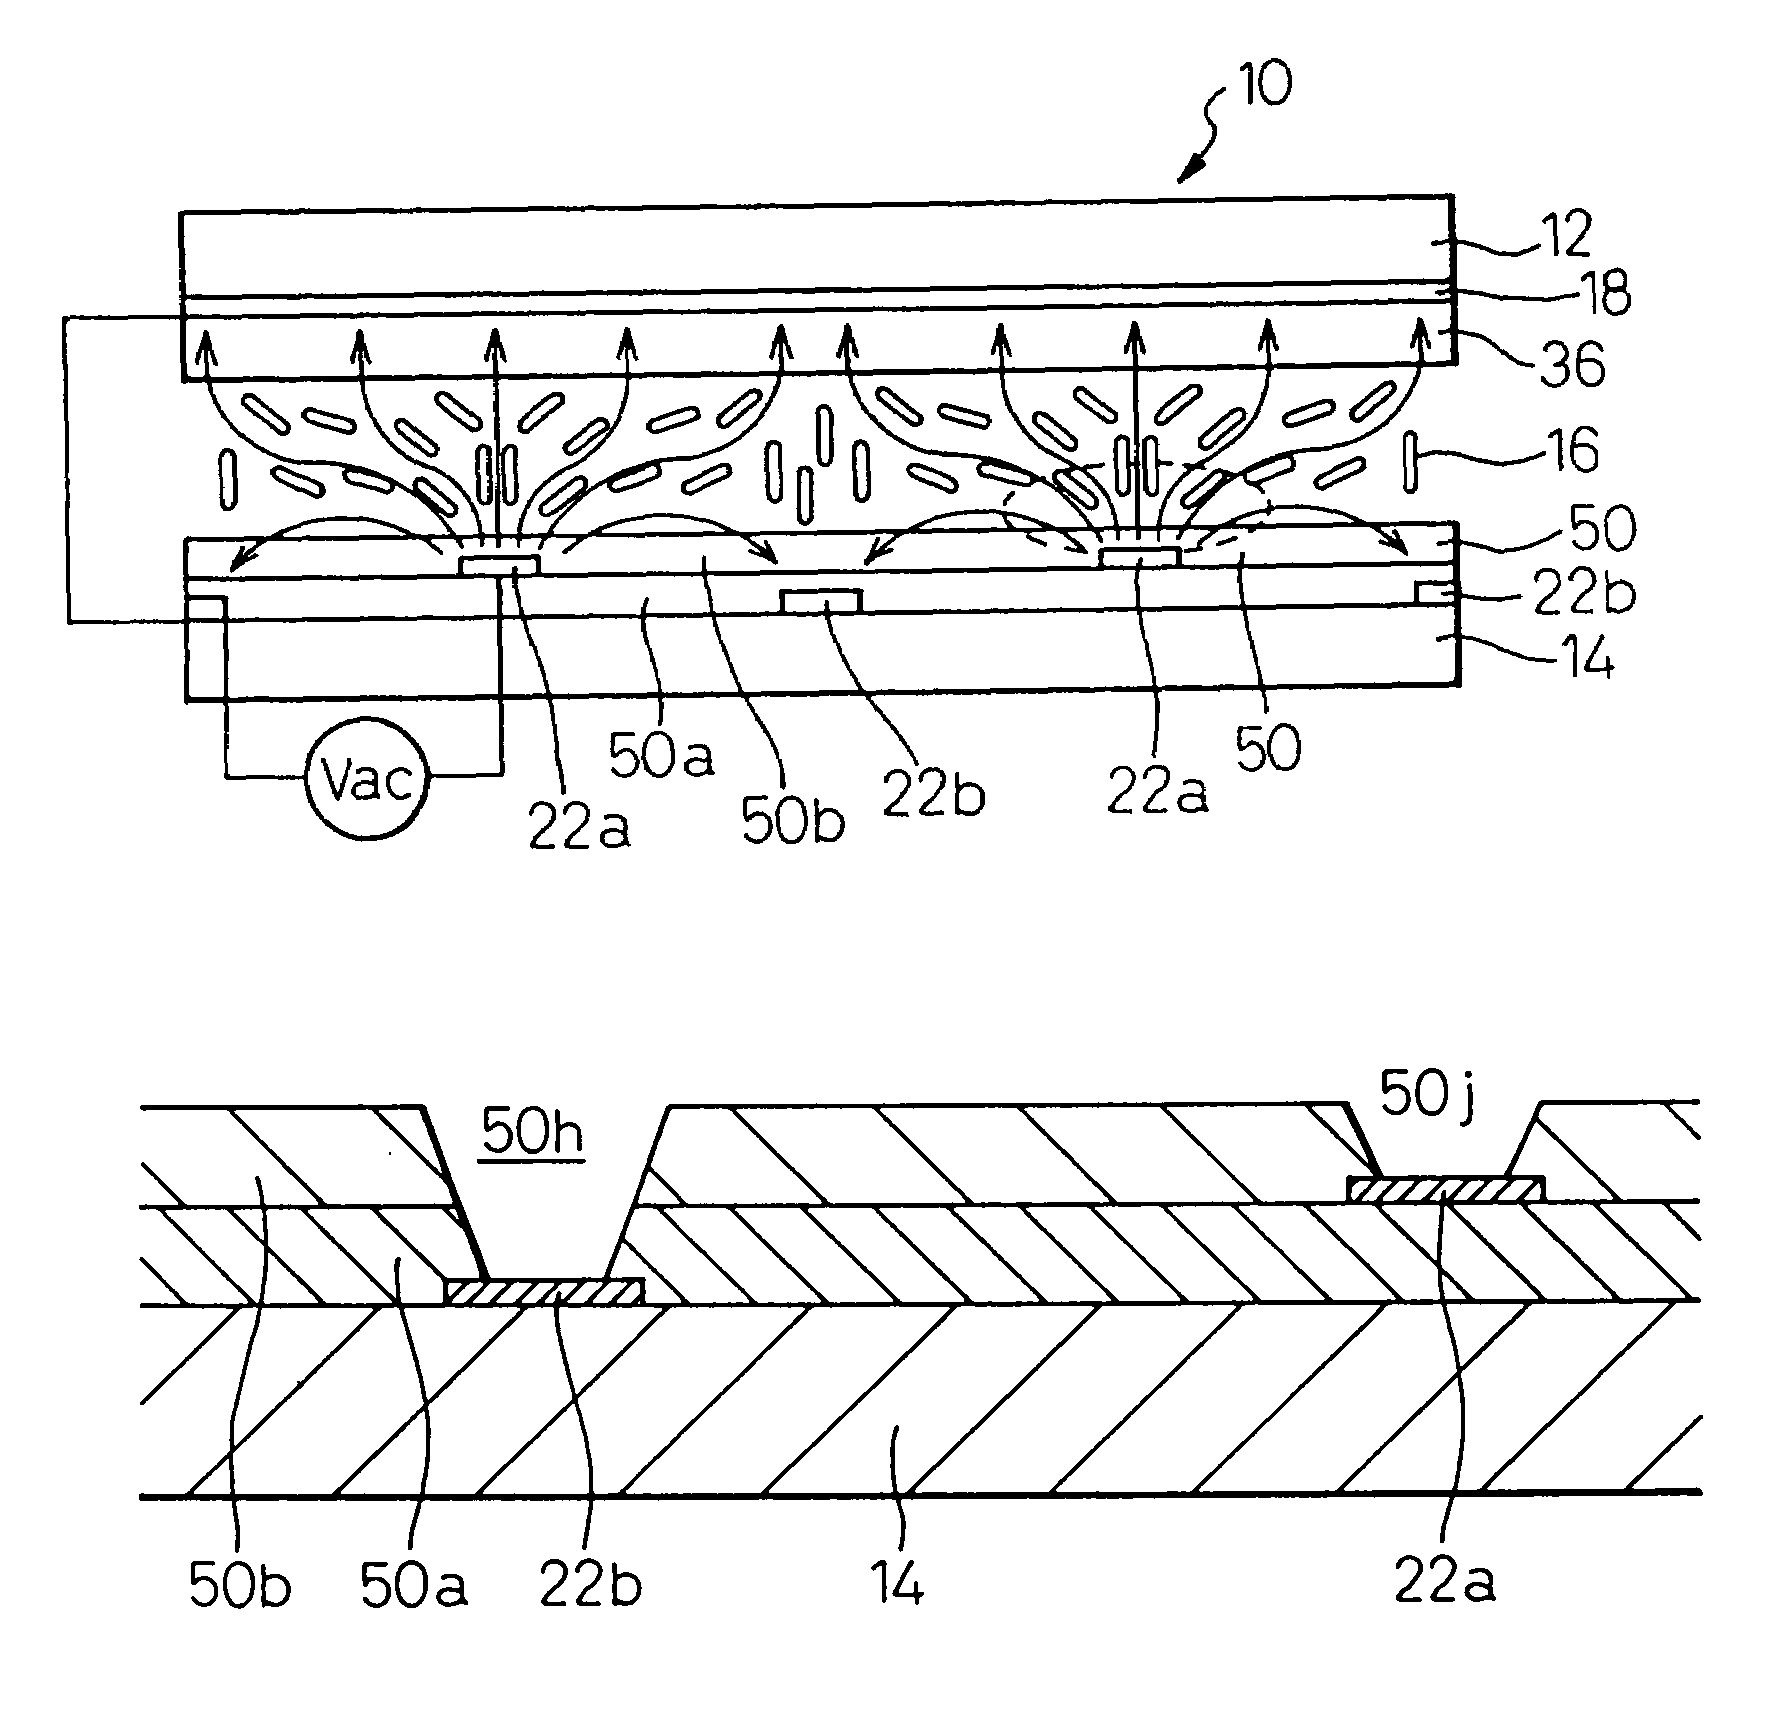 Liquid crystal display apparatus having wide transparent electrode and stripe electrodes